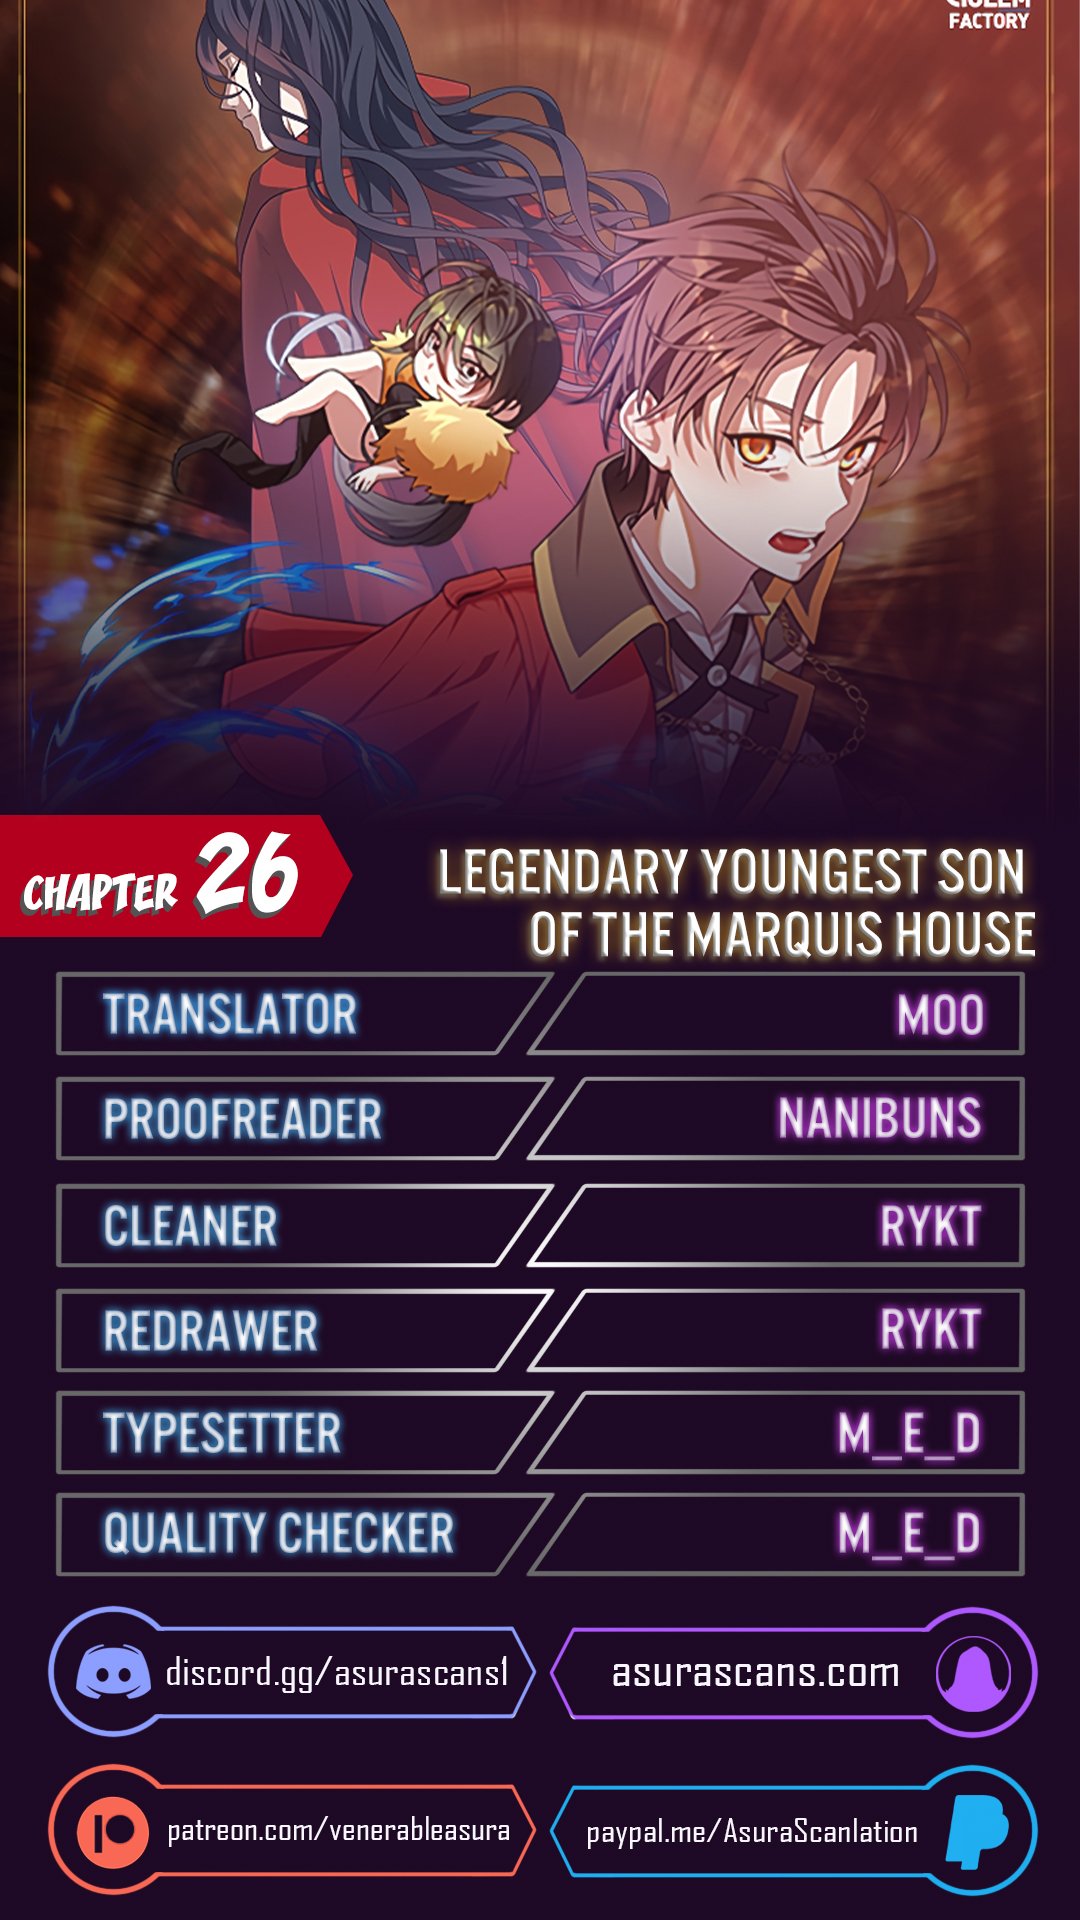 Legendary Youngest Son of the Marquis House - Chapter 18878 - Image 1